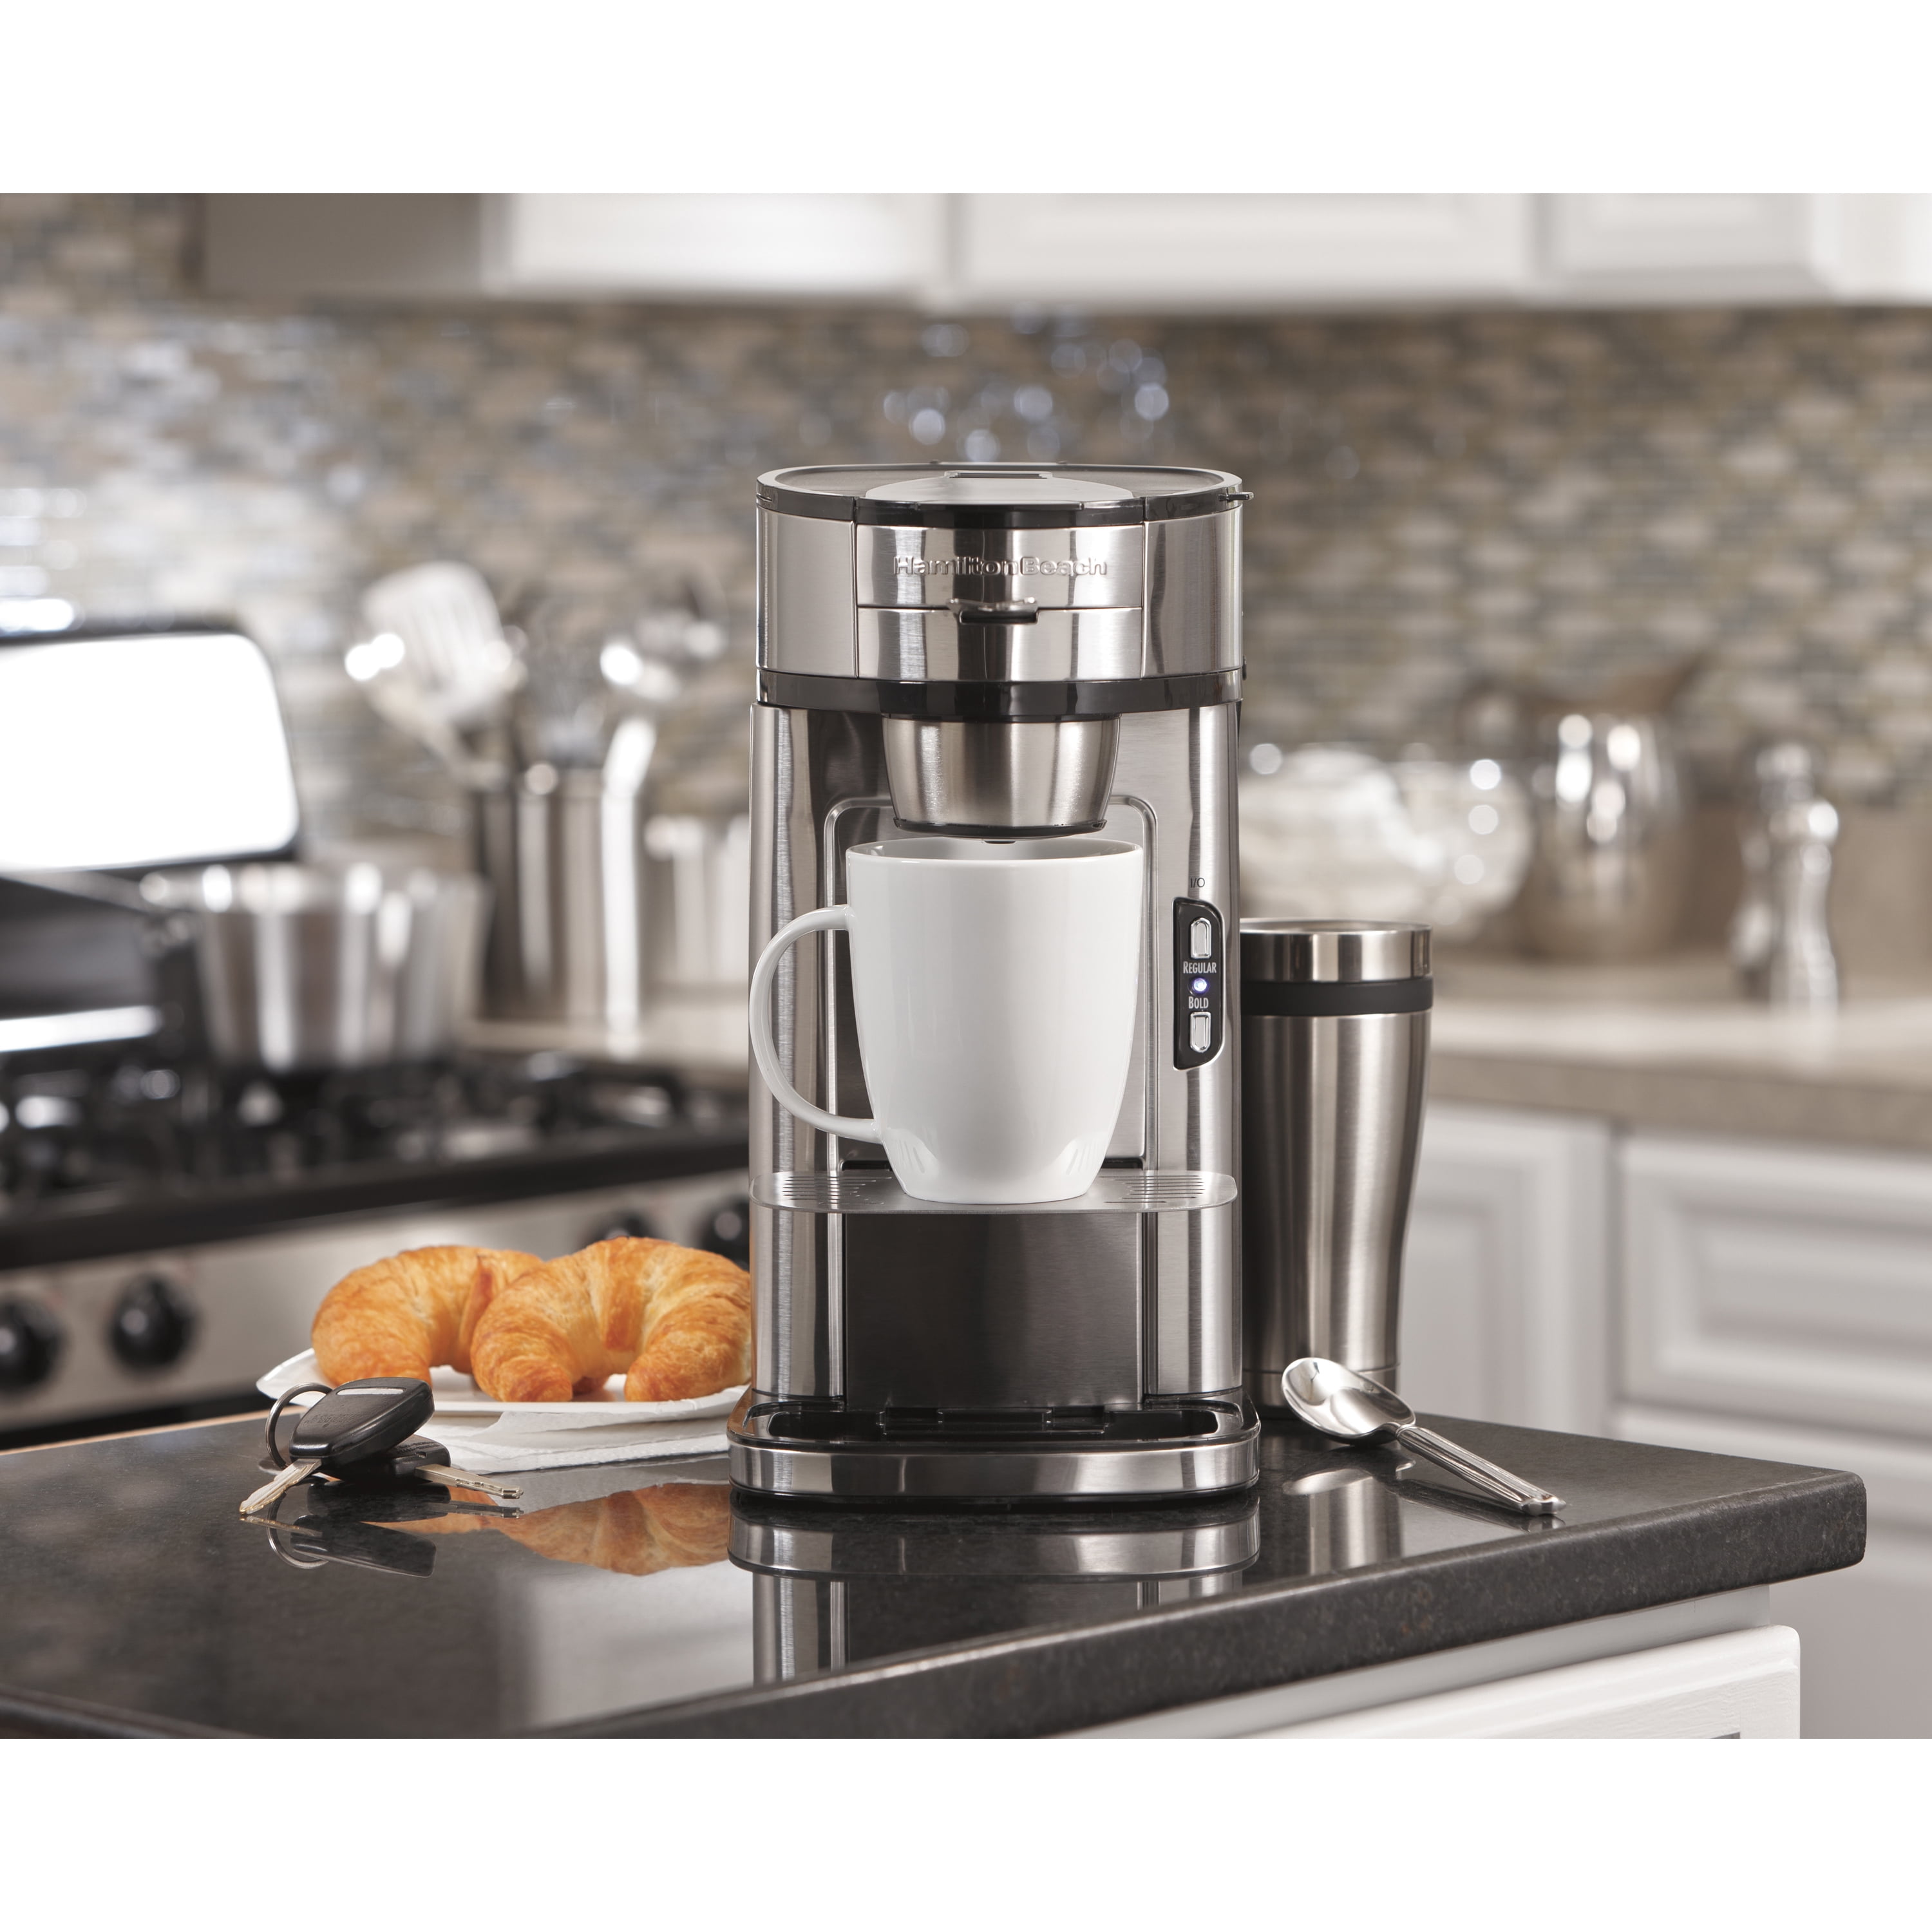 I LOVE Hamilton Beach THE SCOOP Single Serve Coffee Maker 49981A How To &  Review 